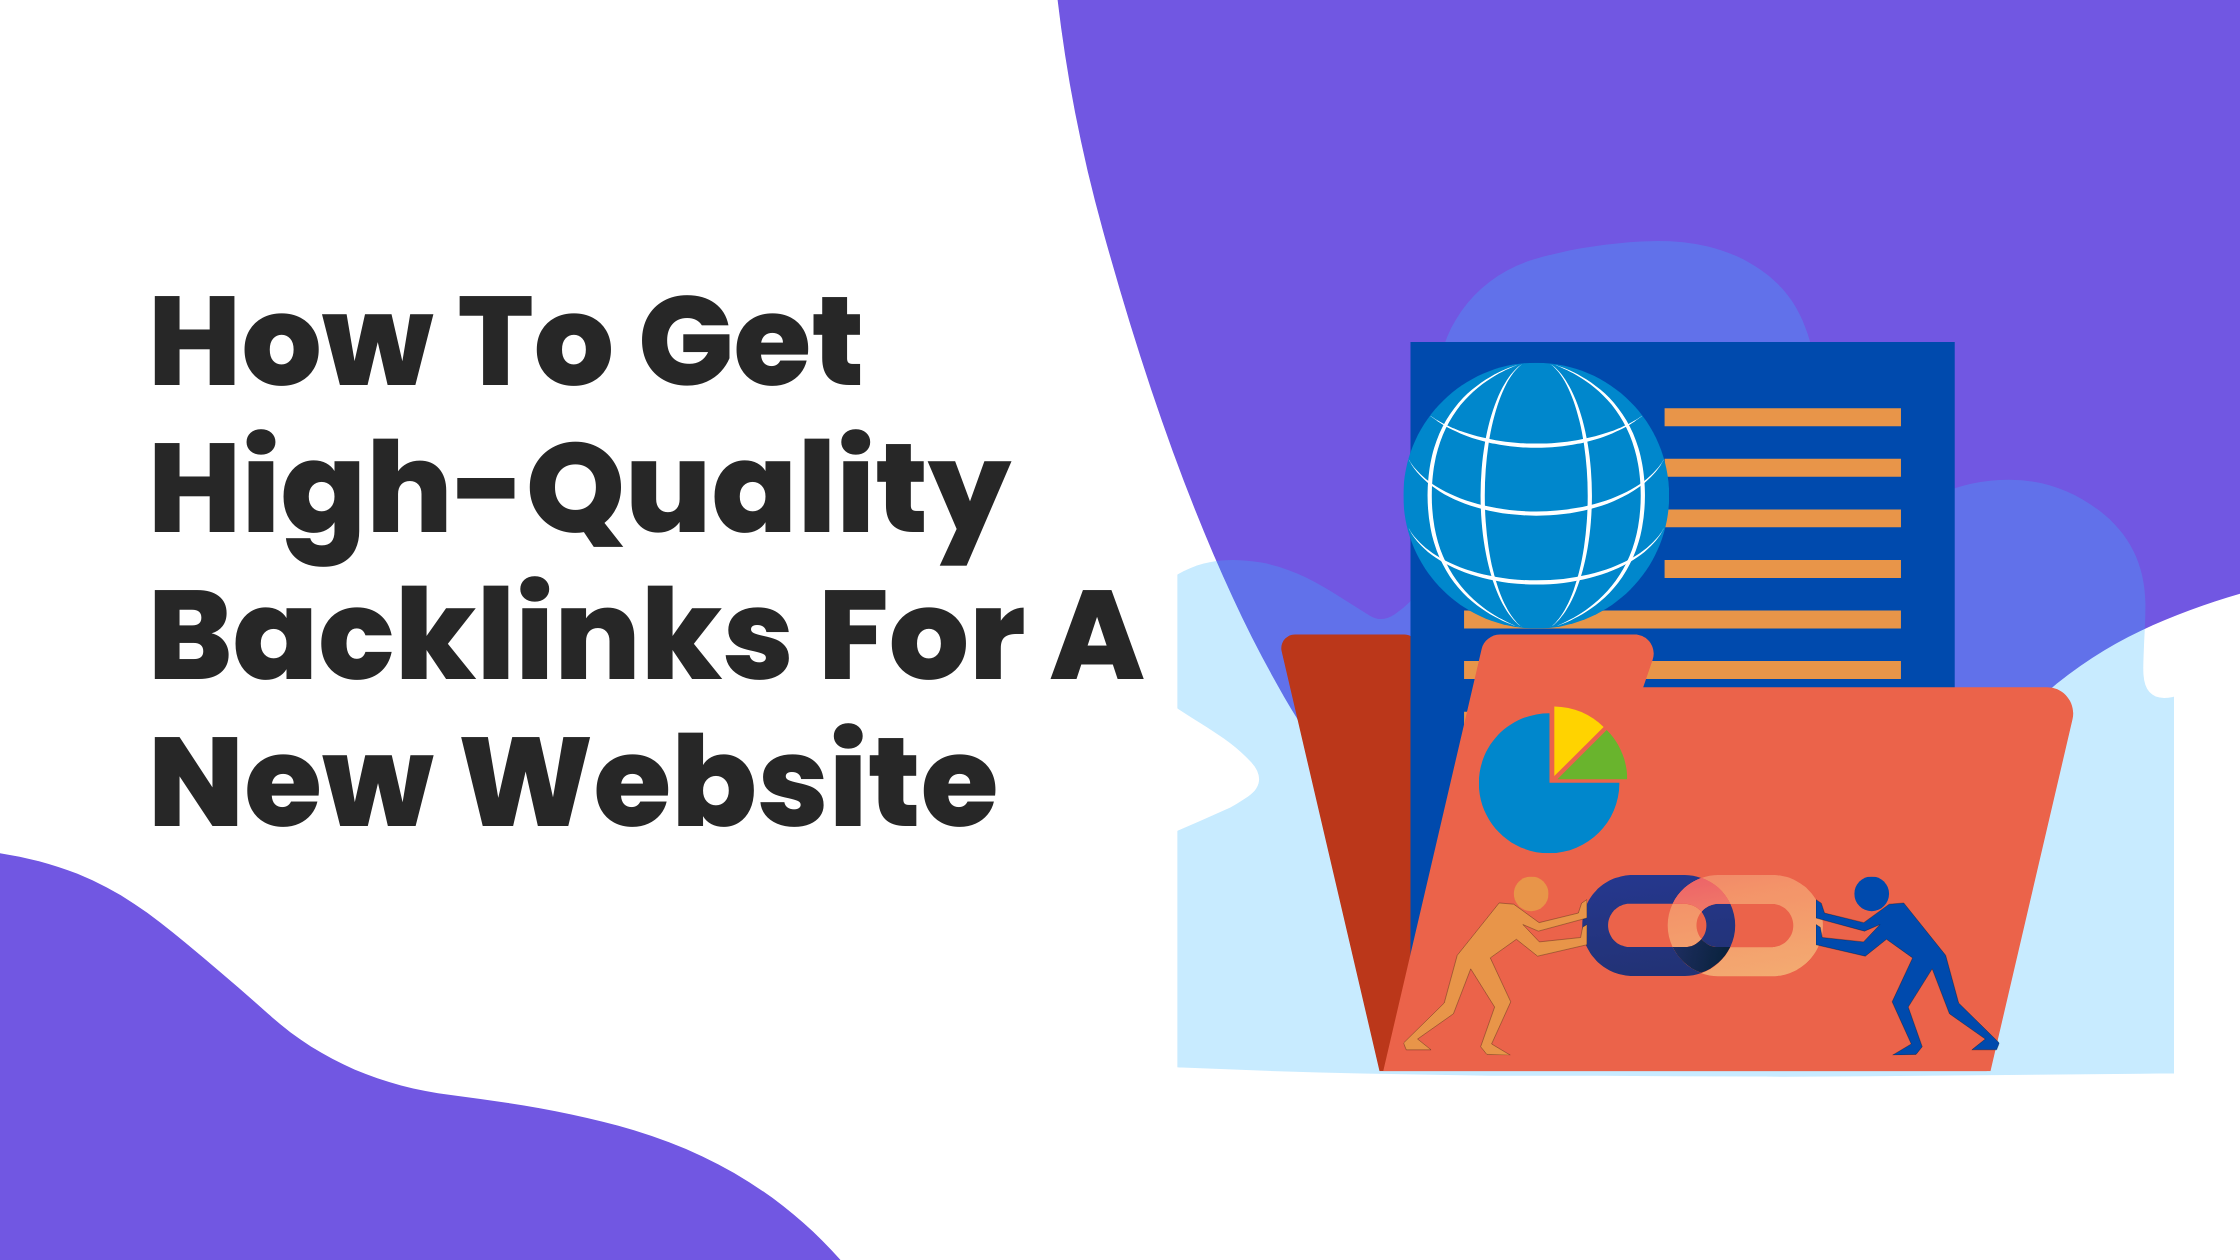 How To Get High-Quality Backlinks For A New Website